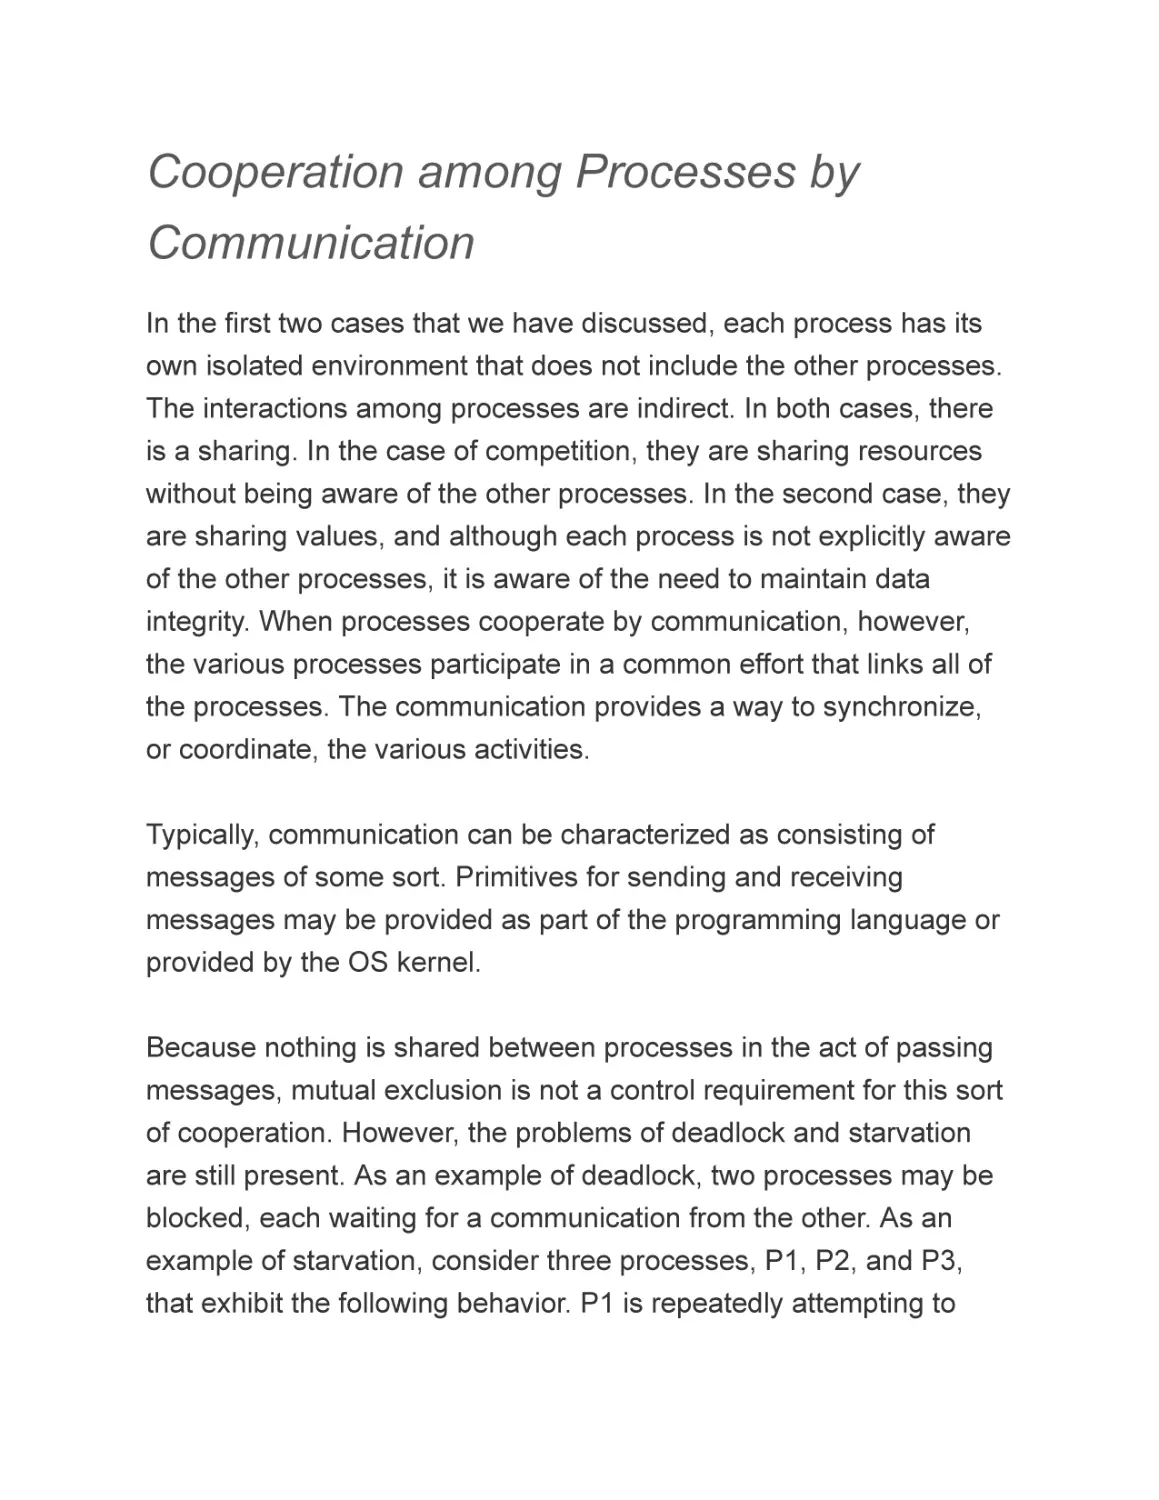 Cooperation among Processes by Communication